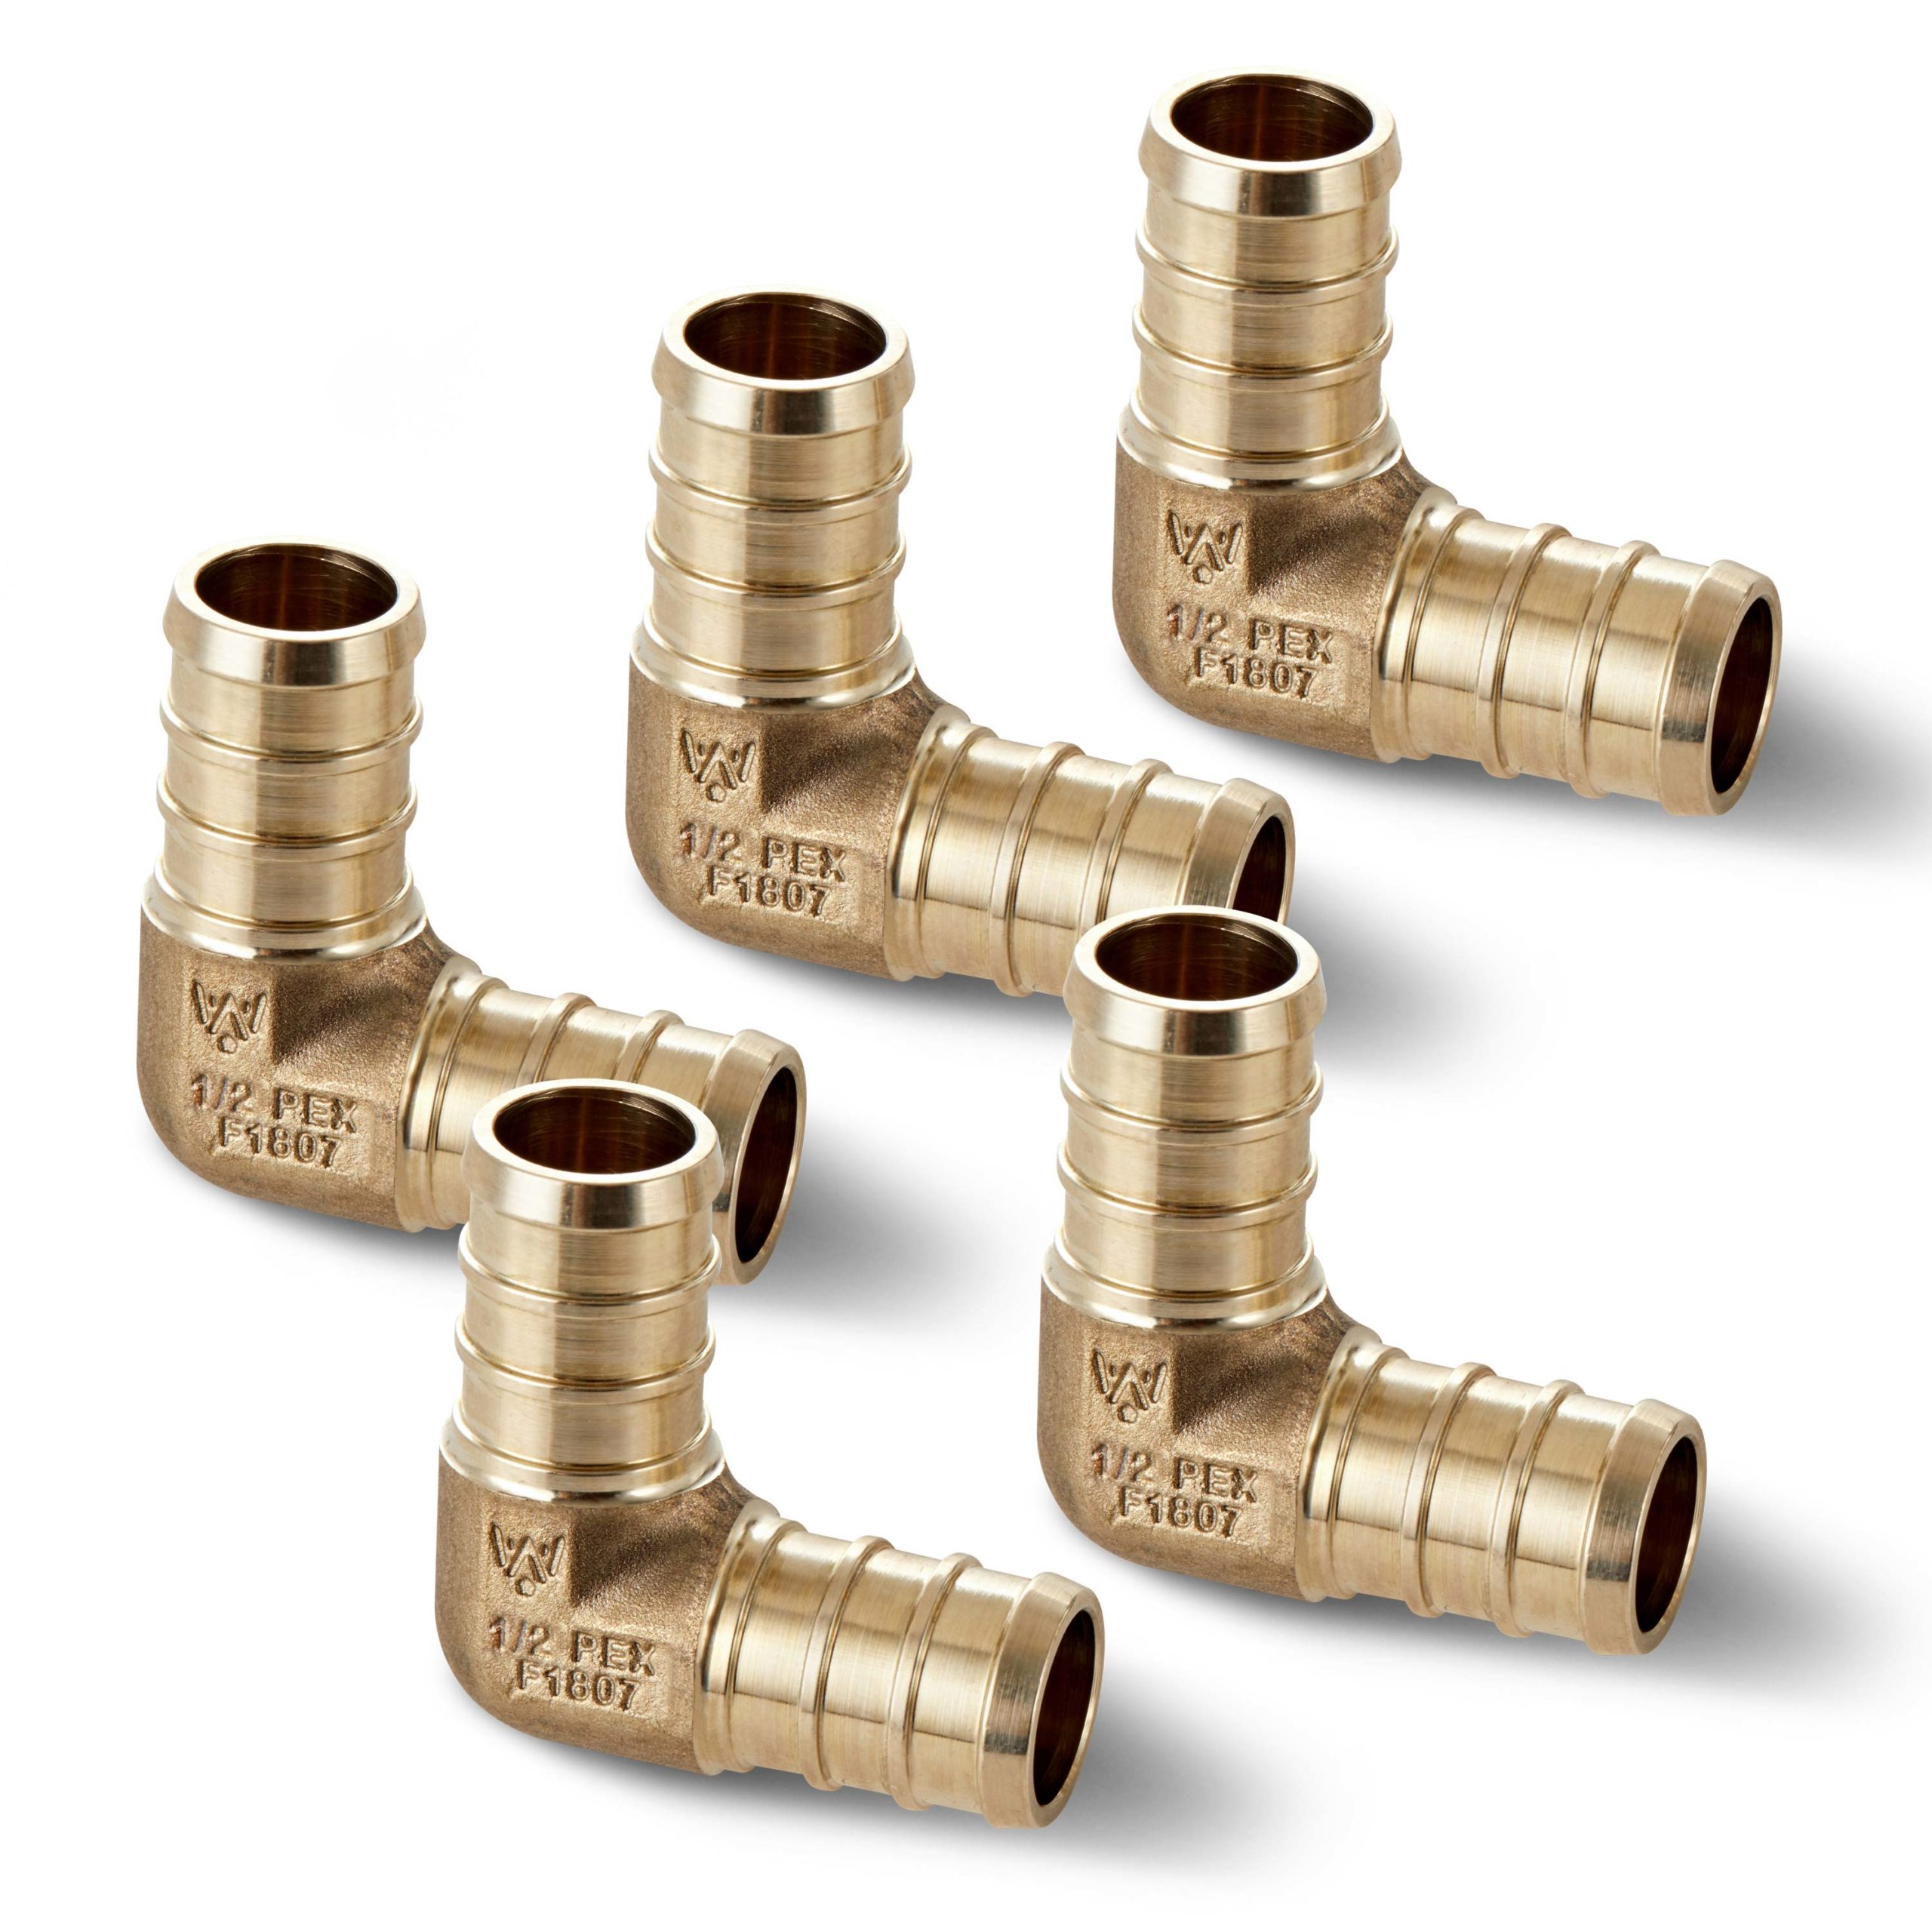 50 New 1/2 x 1/2 PEX 90° Brass Lead Free Elbows Replaces Watts LFWP19B-08PB by The ROP Shop